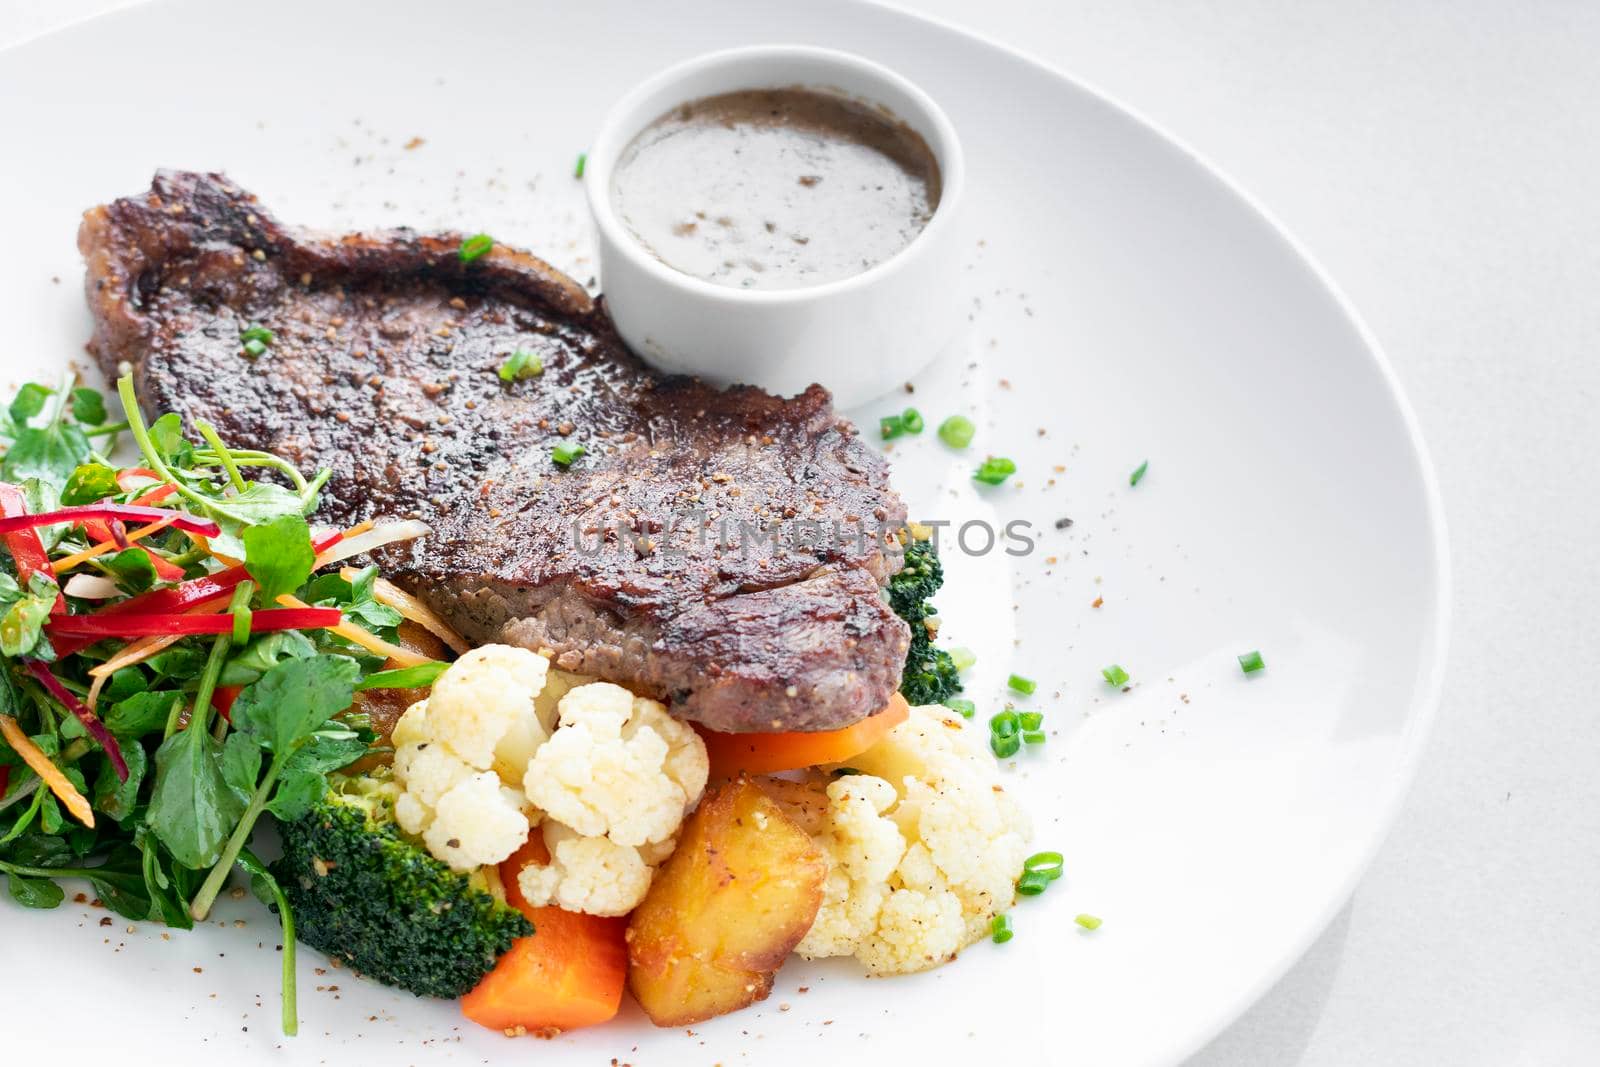 premium beef steak with steamed vegetables and mushroom sauce gourmet meal on white plate